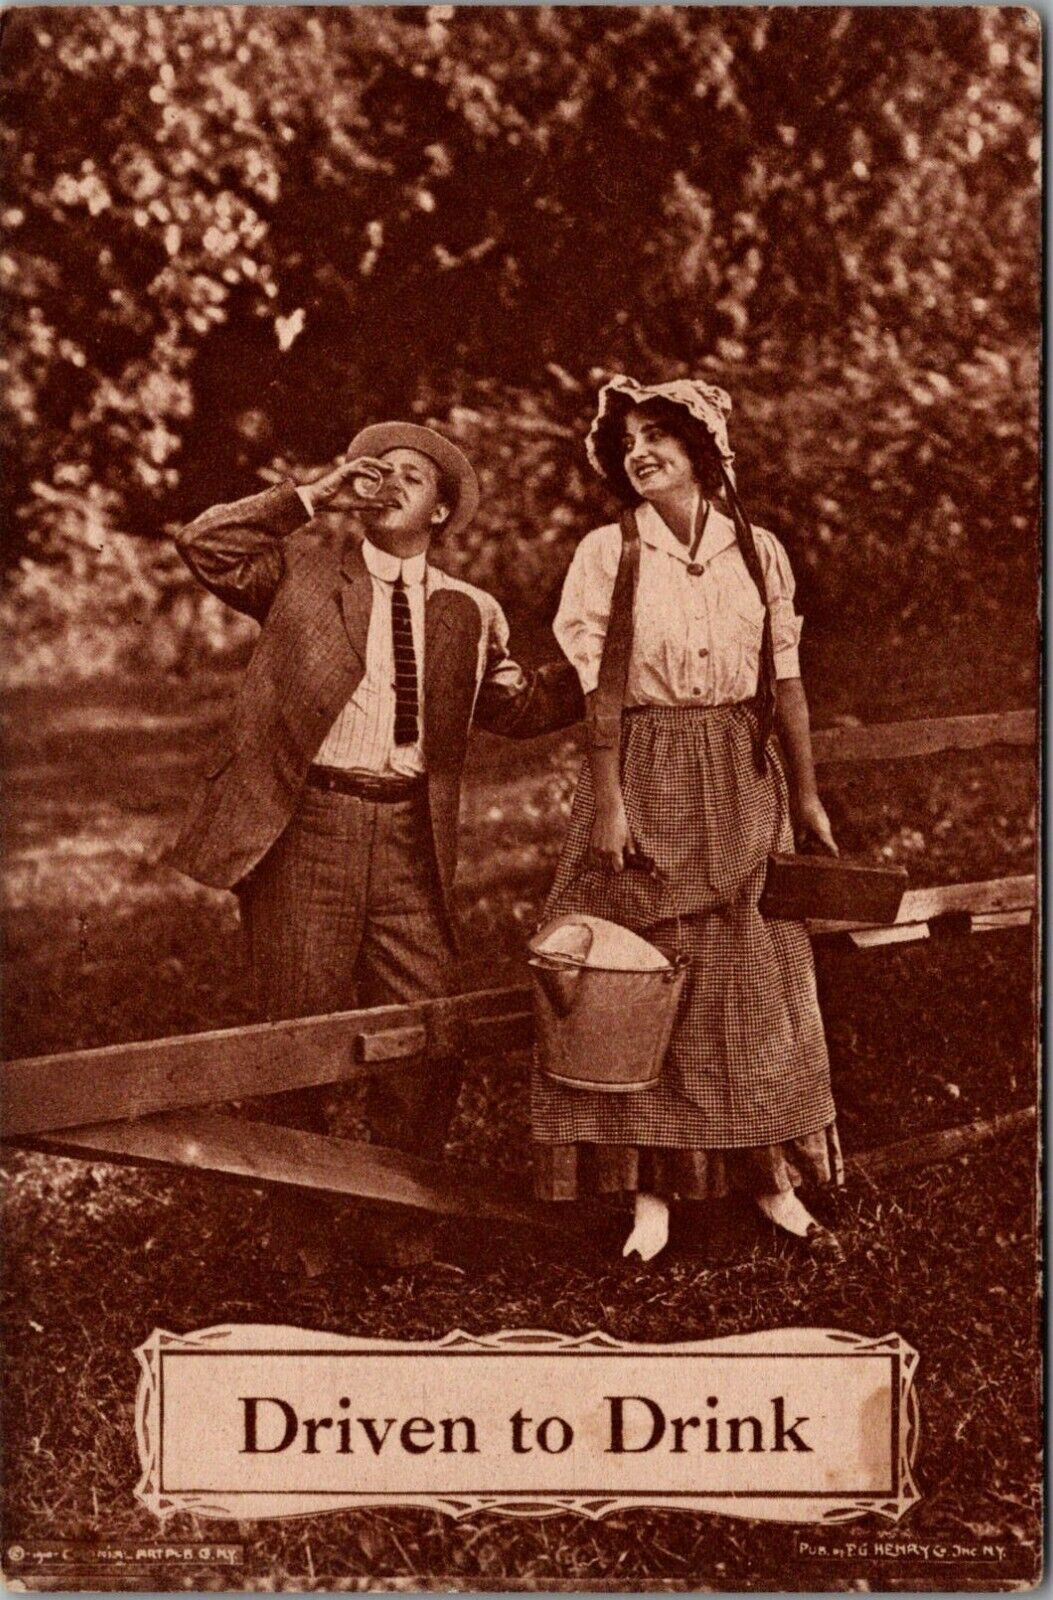 Postcard Driven to Drink, Vintage Man Drinking Alcohol With Woman on Picnic  E4